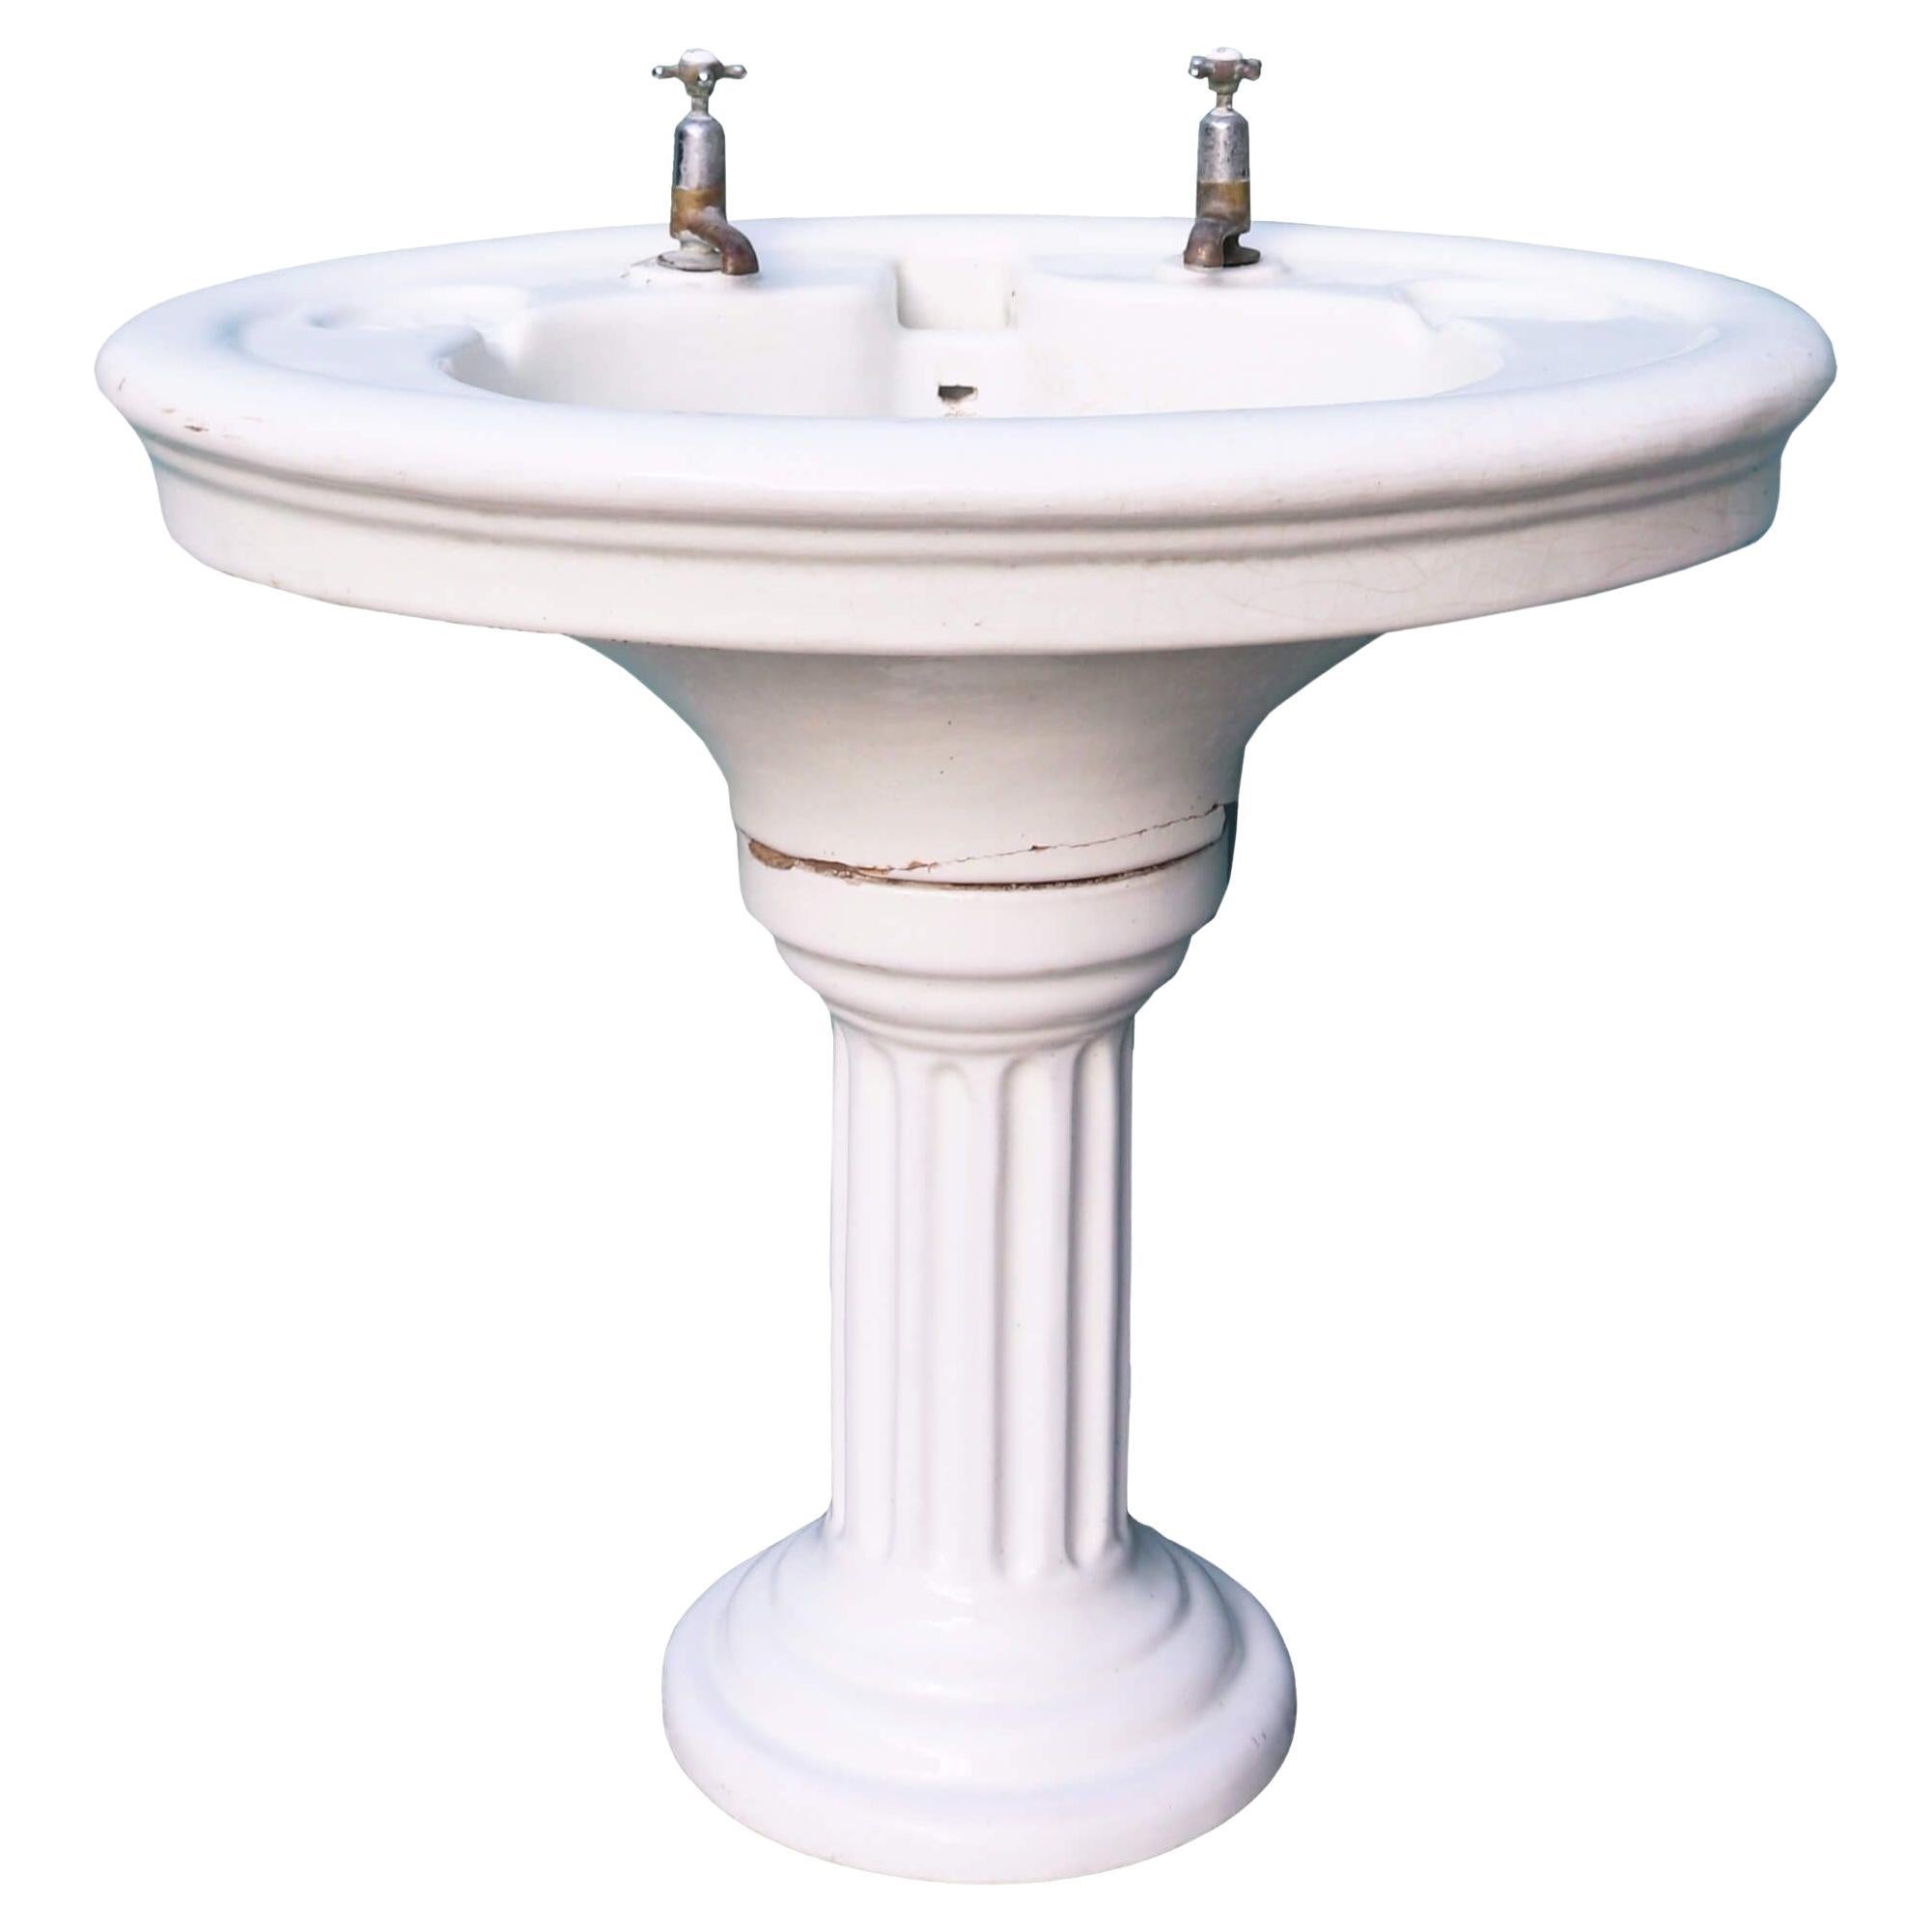 Reclaimed Doulton & Co Antique Pedestal Washstand